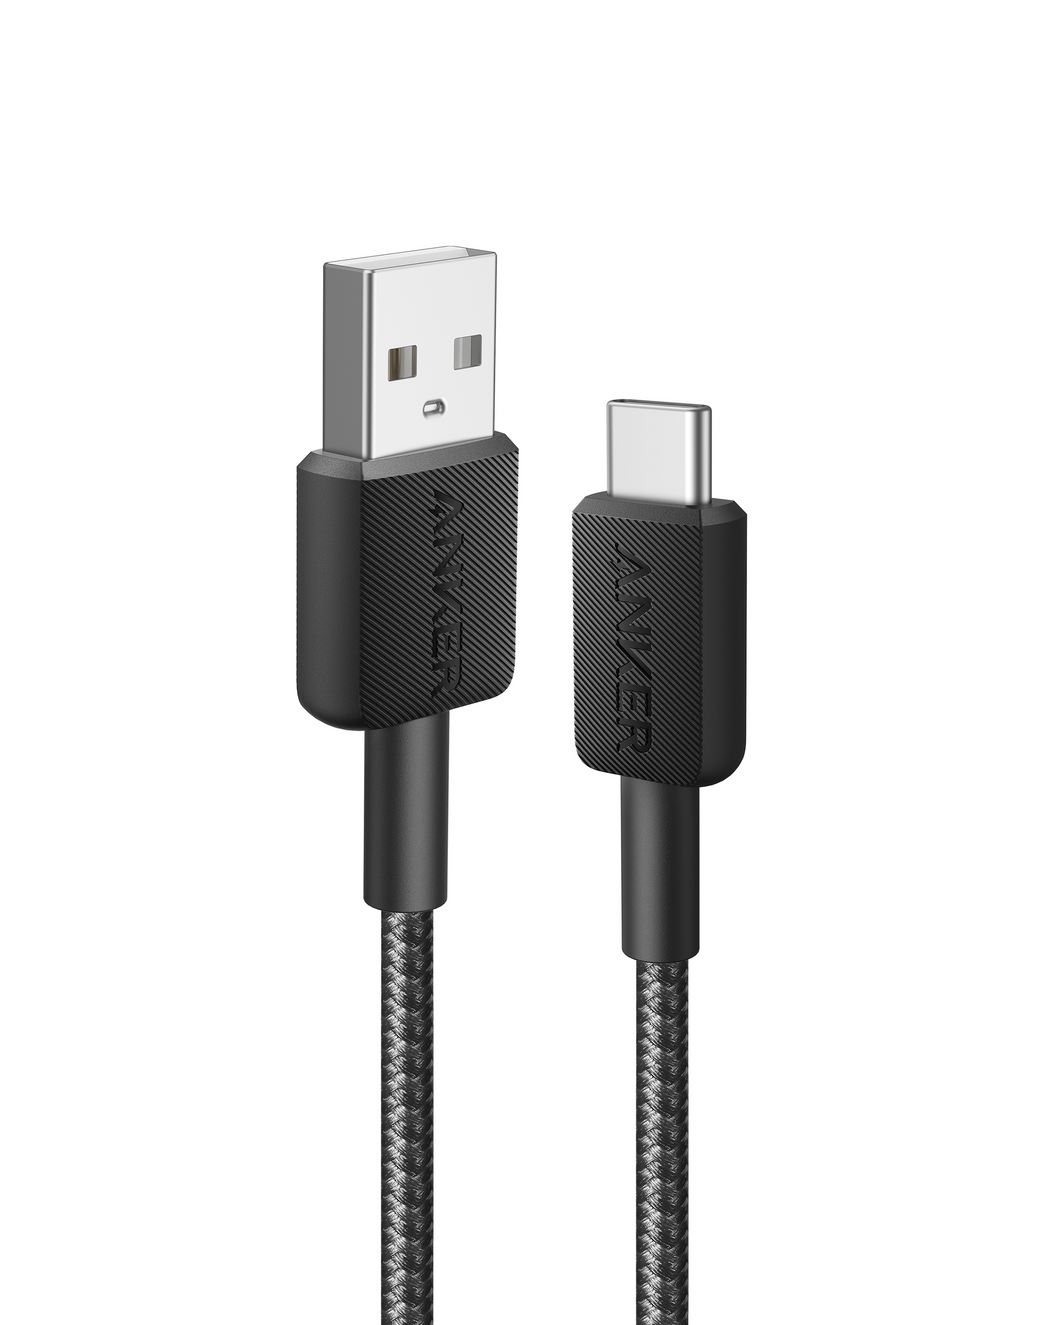 Anker 322 USB-A to USB-C Cable -0.9m